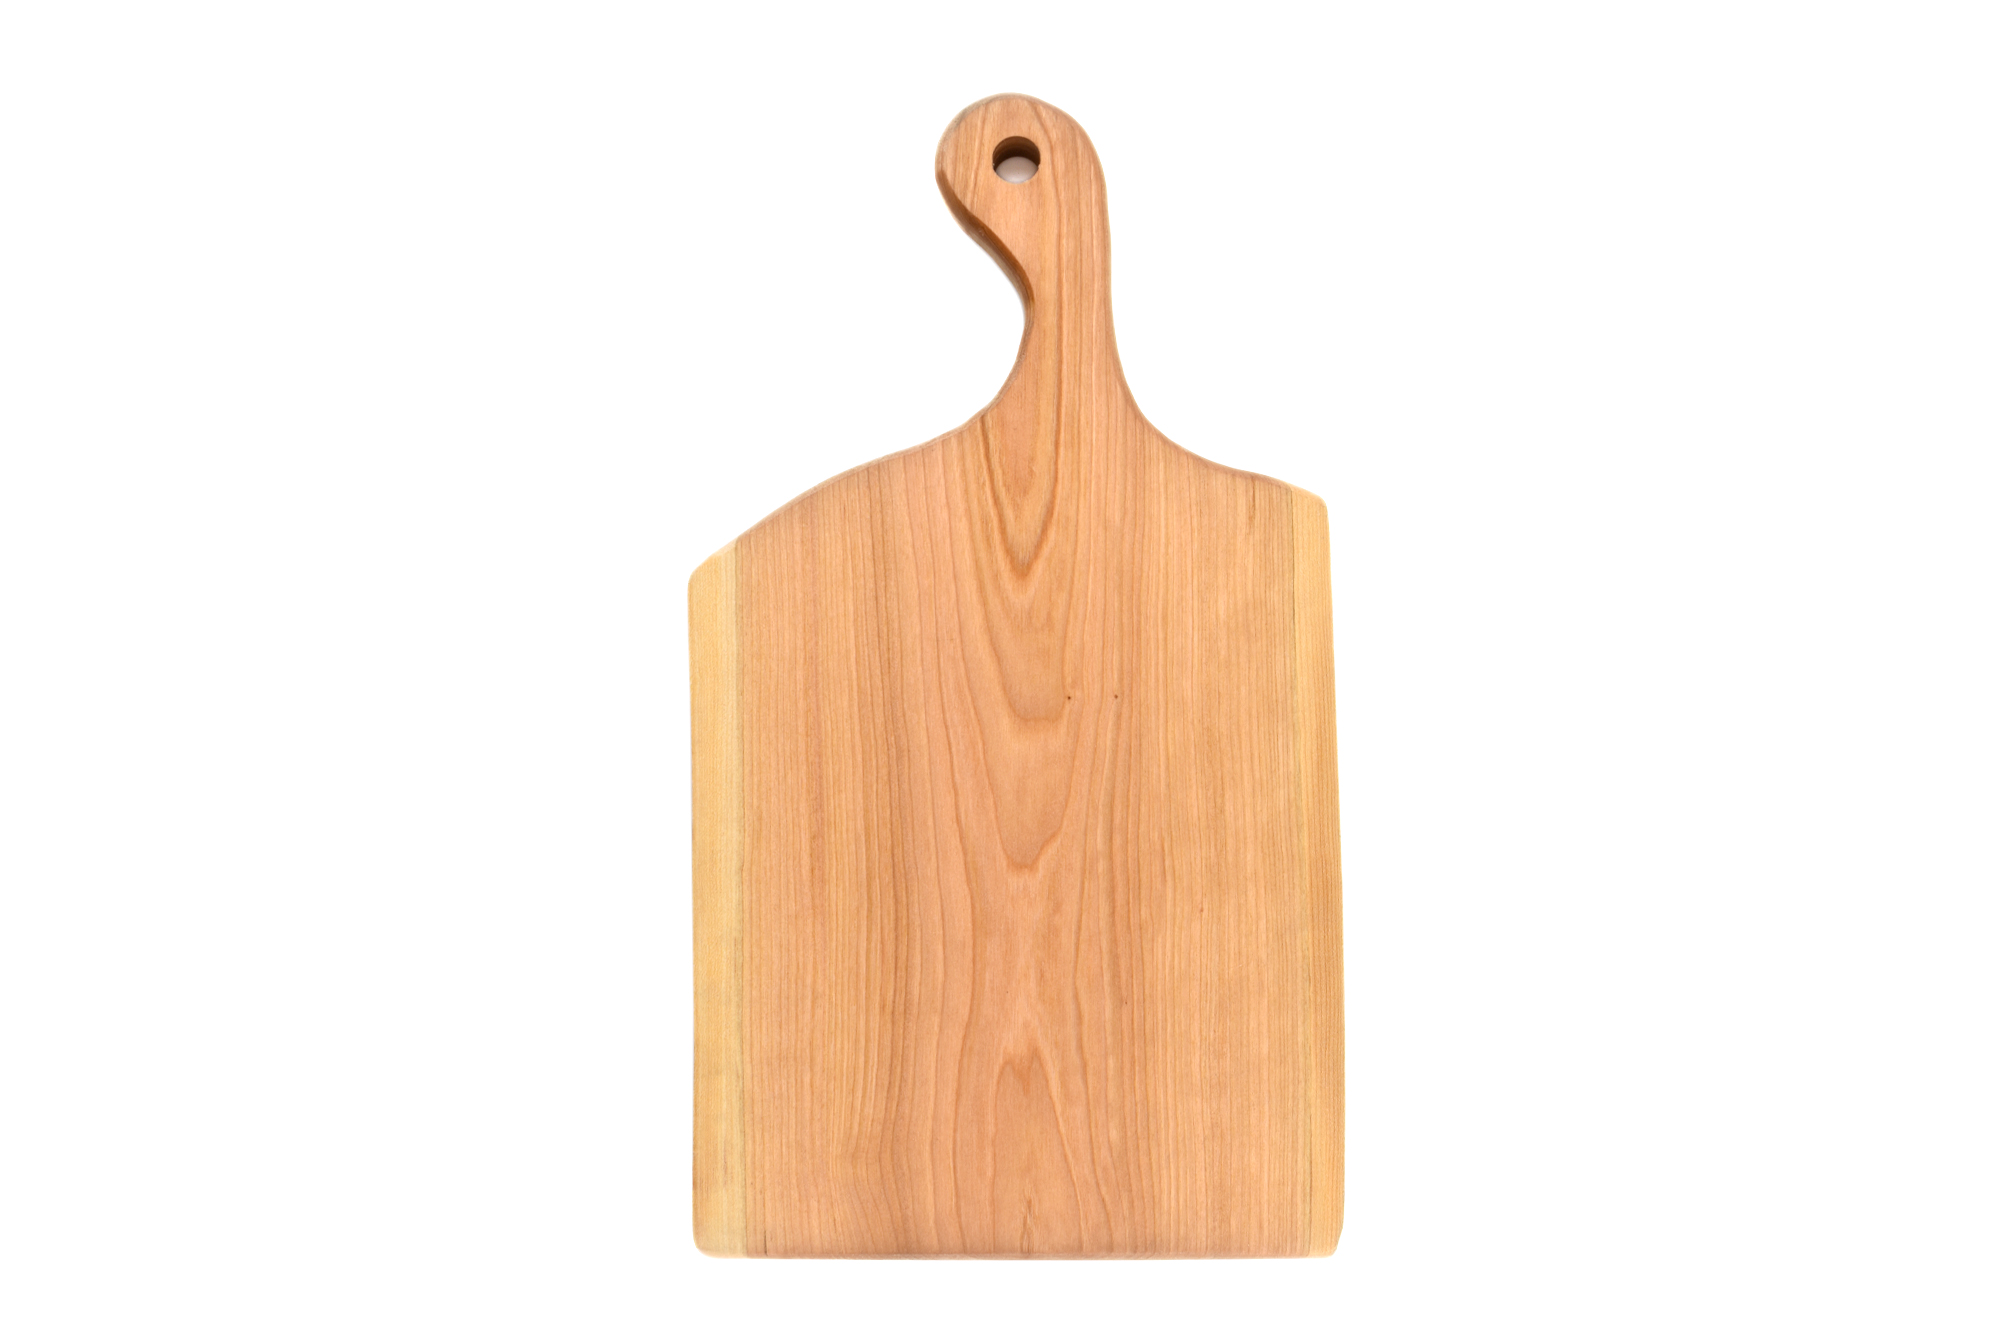 Artisan solid Cherry wood cutting/serving board with curved 4" handle